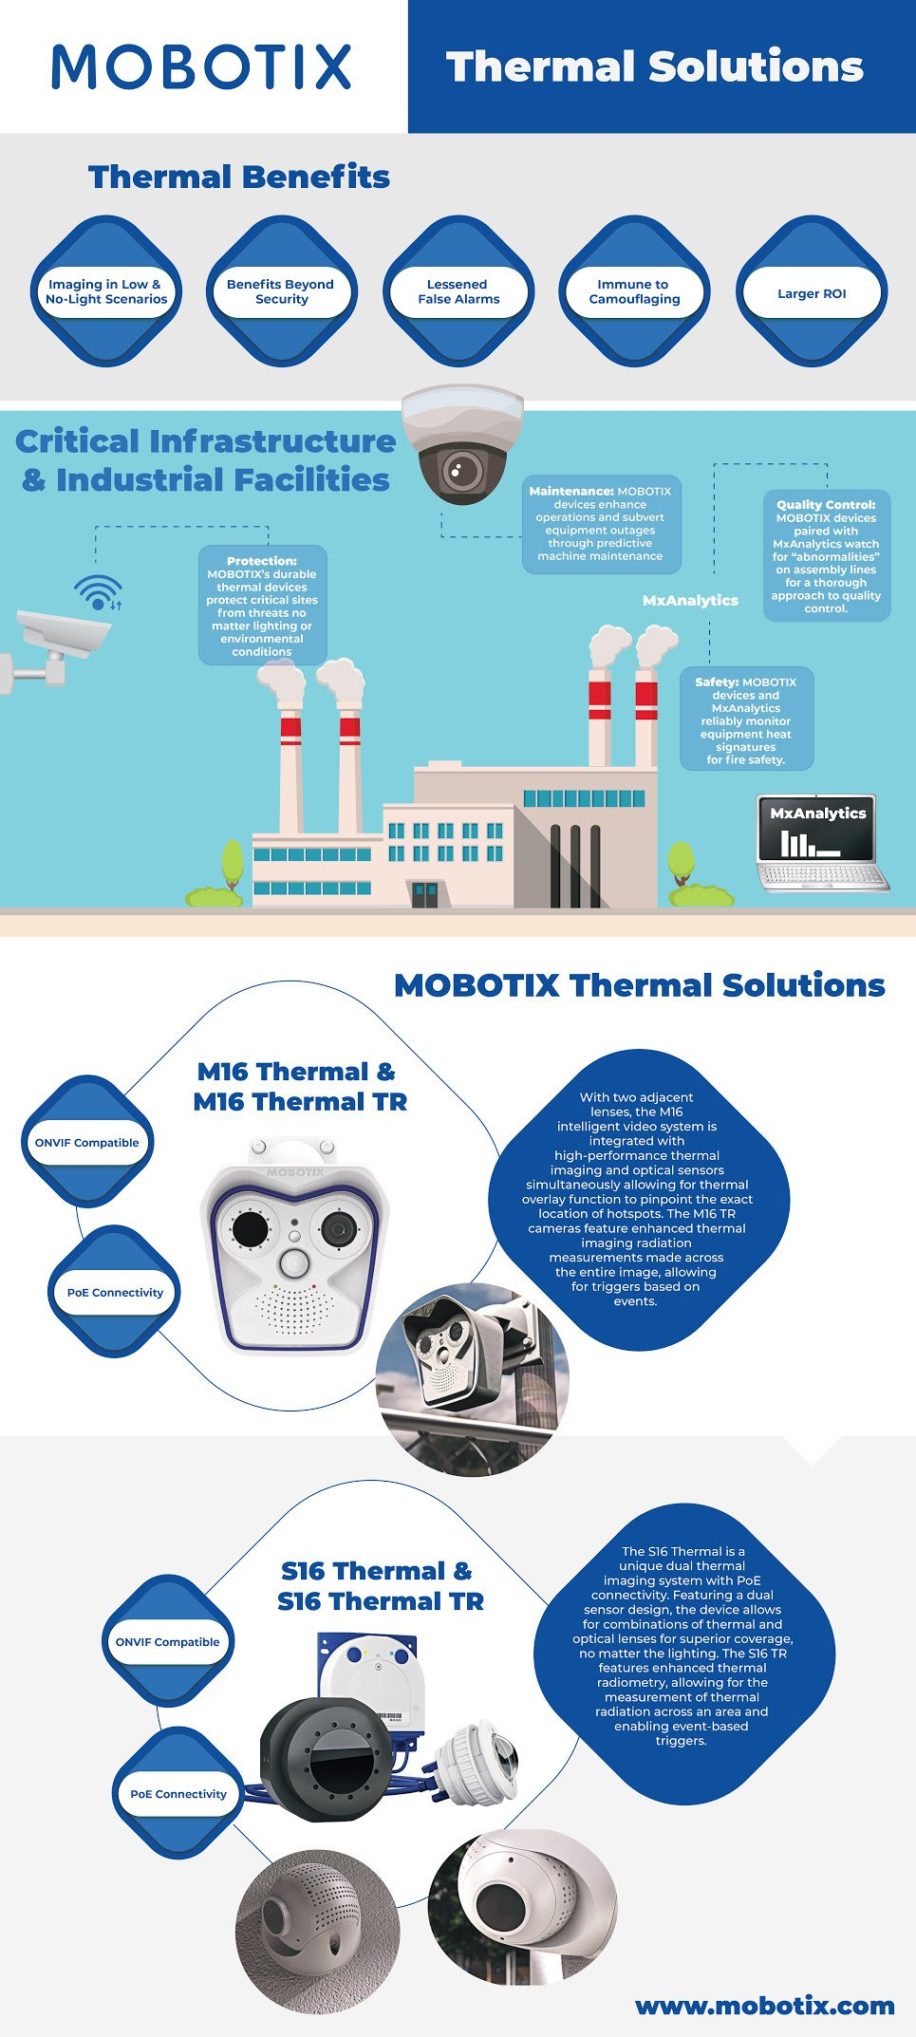 Mobotix thermal camera solutions for critical infrastructure and industrial facilities. Birmingham-based Vulcan Security Systems serves Alabama businesses with thermal camera installation and monitoring needs.